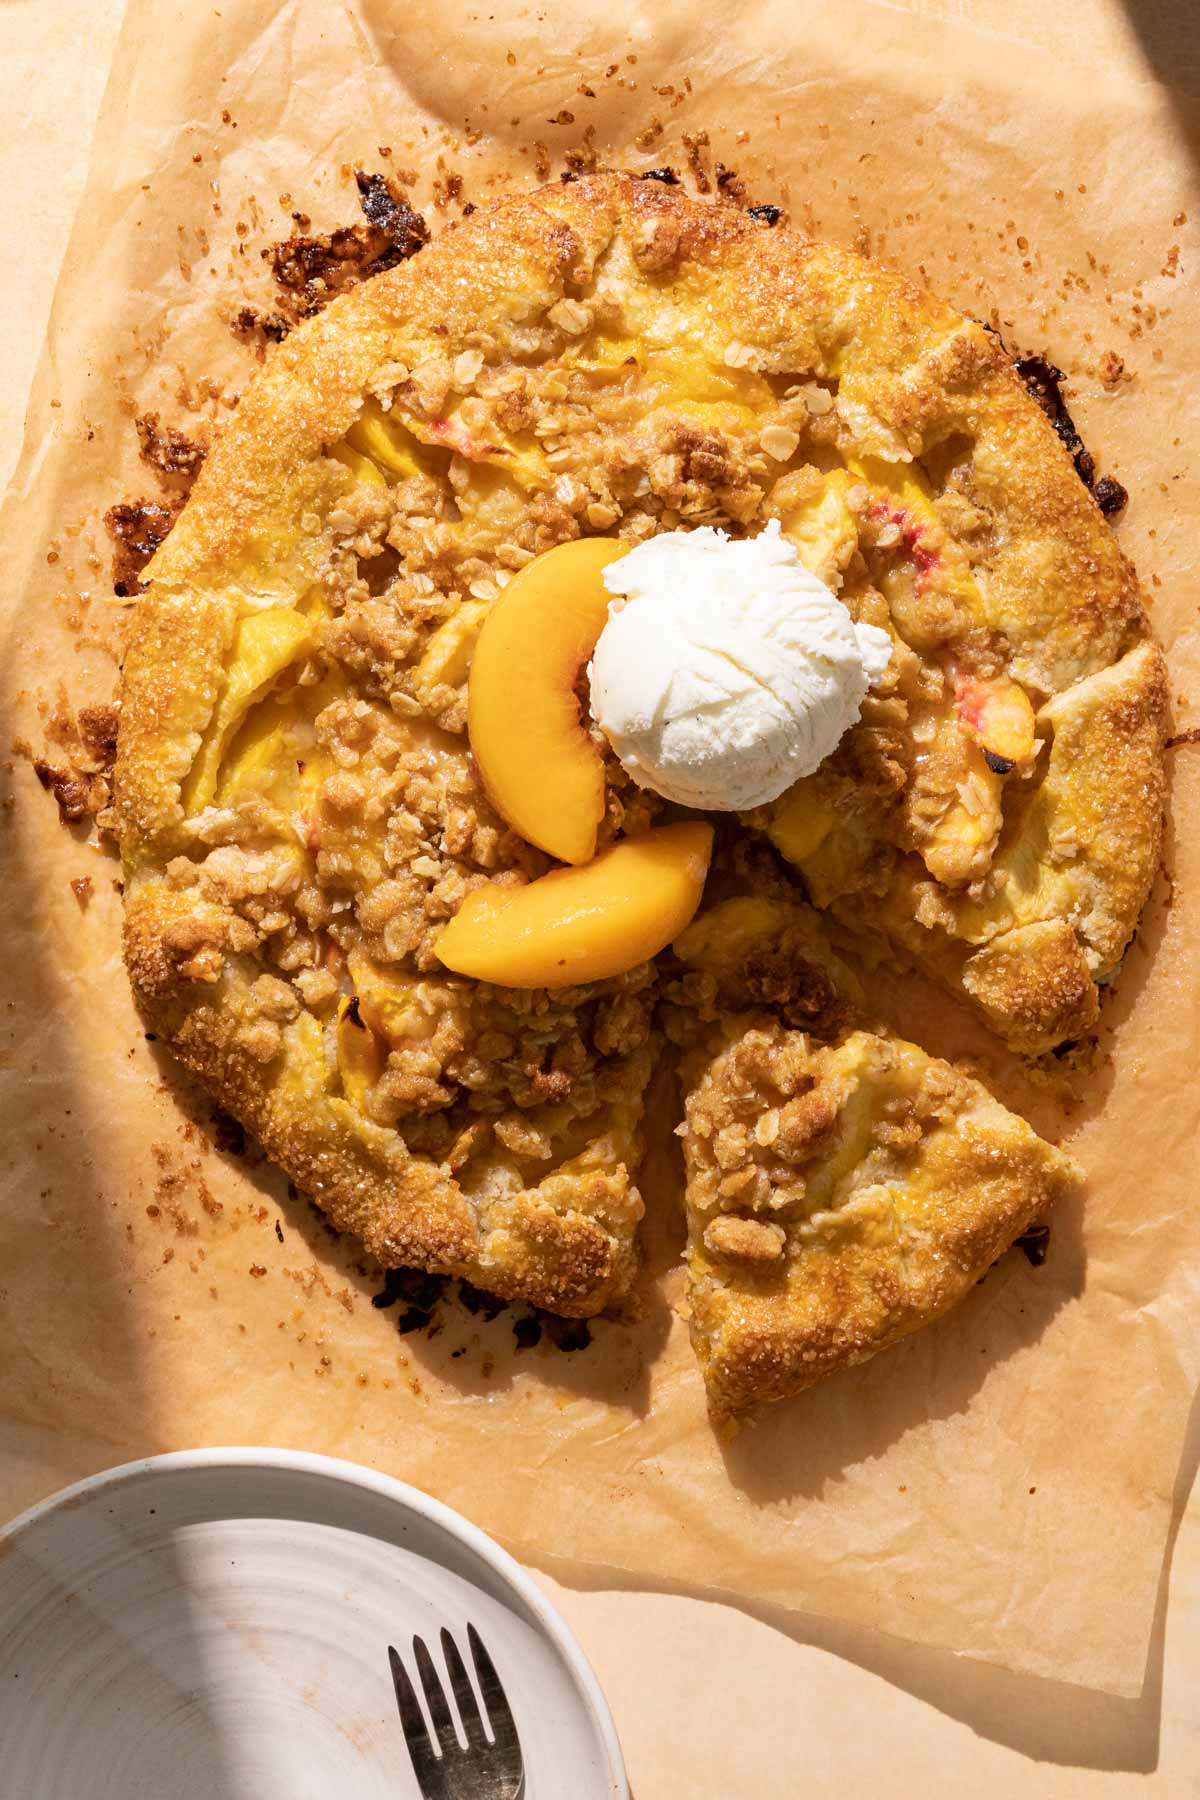 Peach crostata with a scoop of ice cream on top